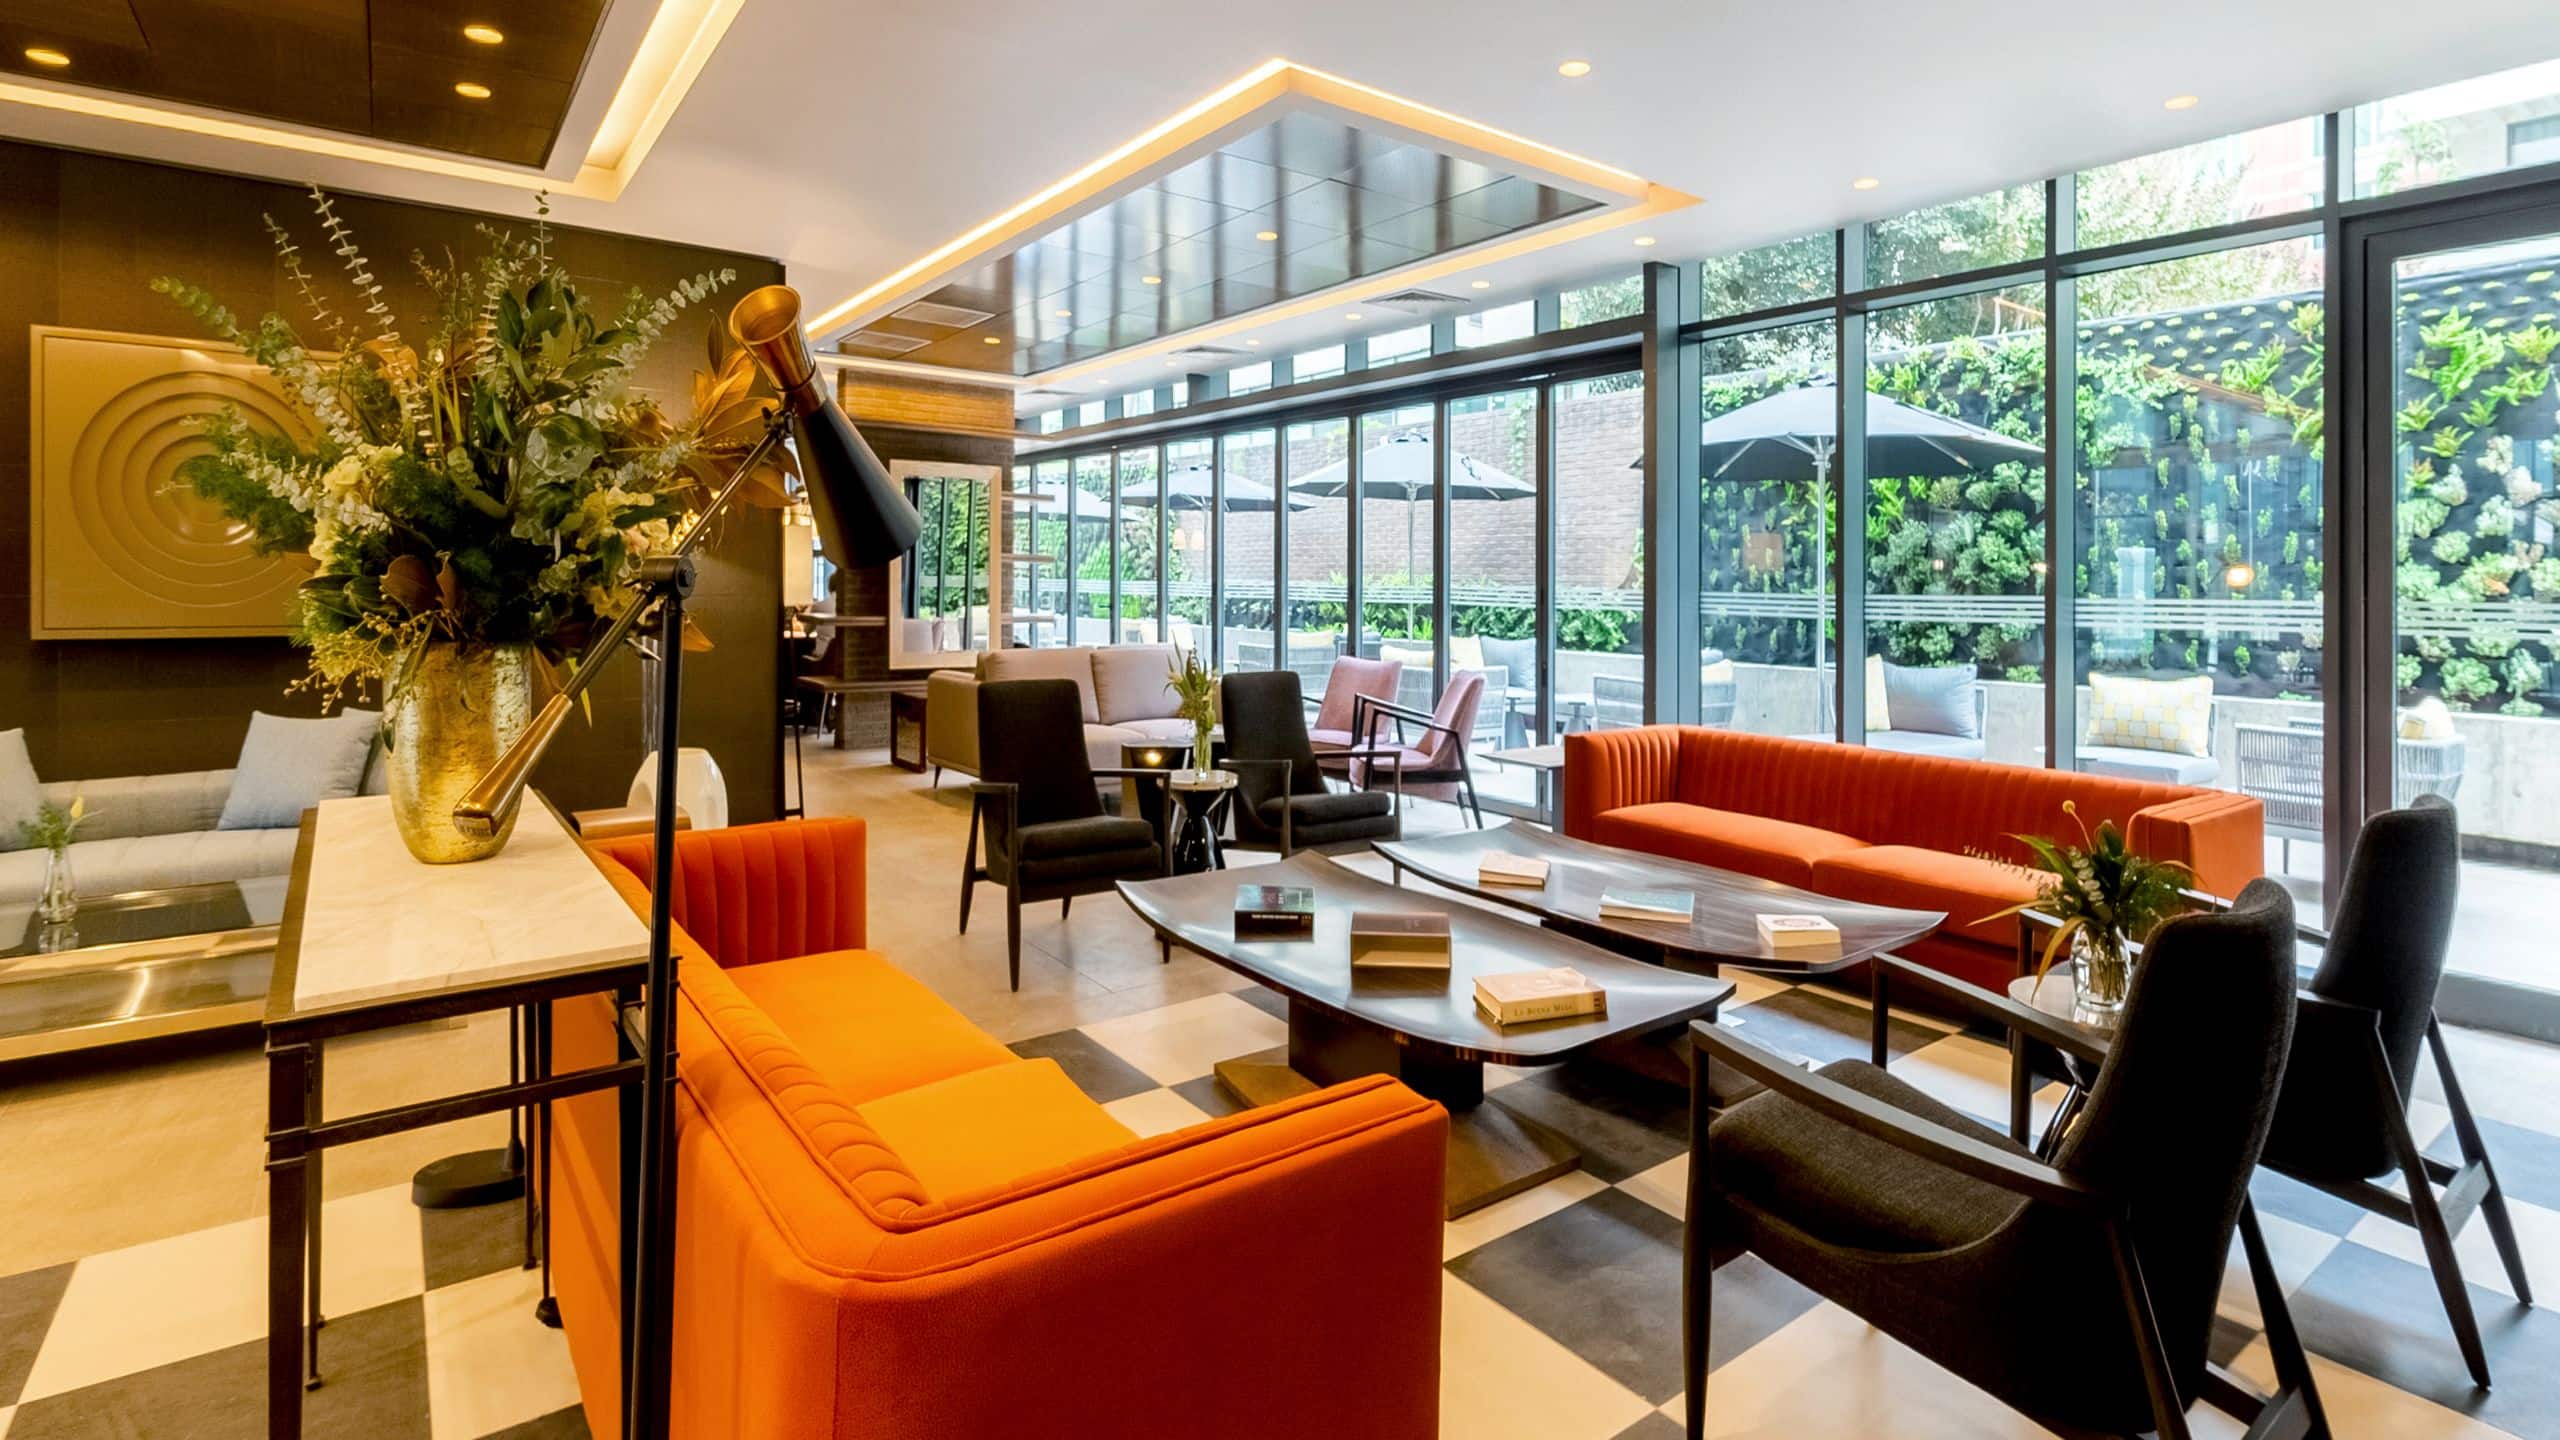 Main lobby with sofas, chairs and floor to ceiling windows overlooking the courtyard